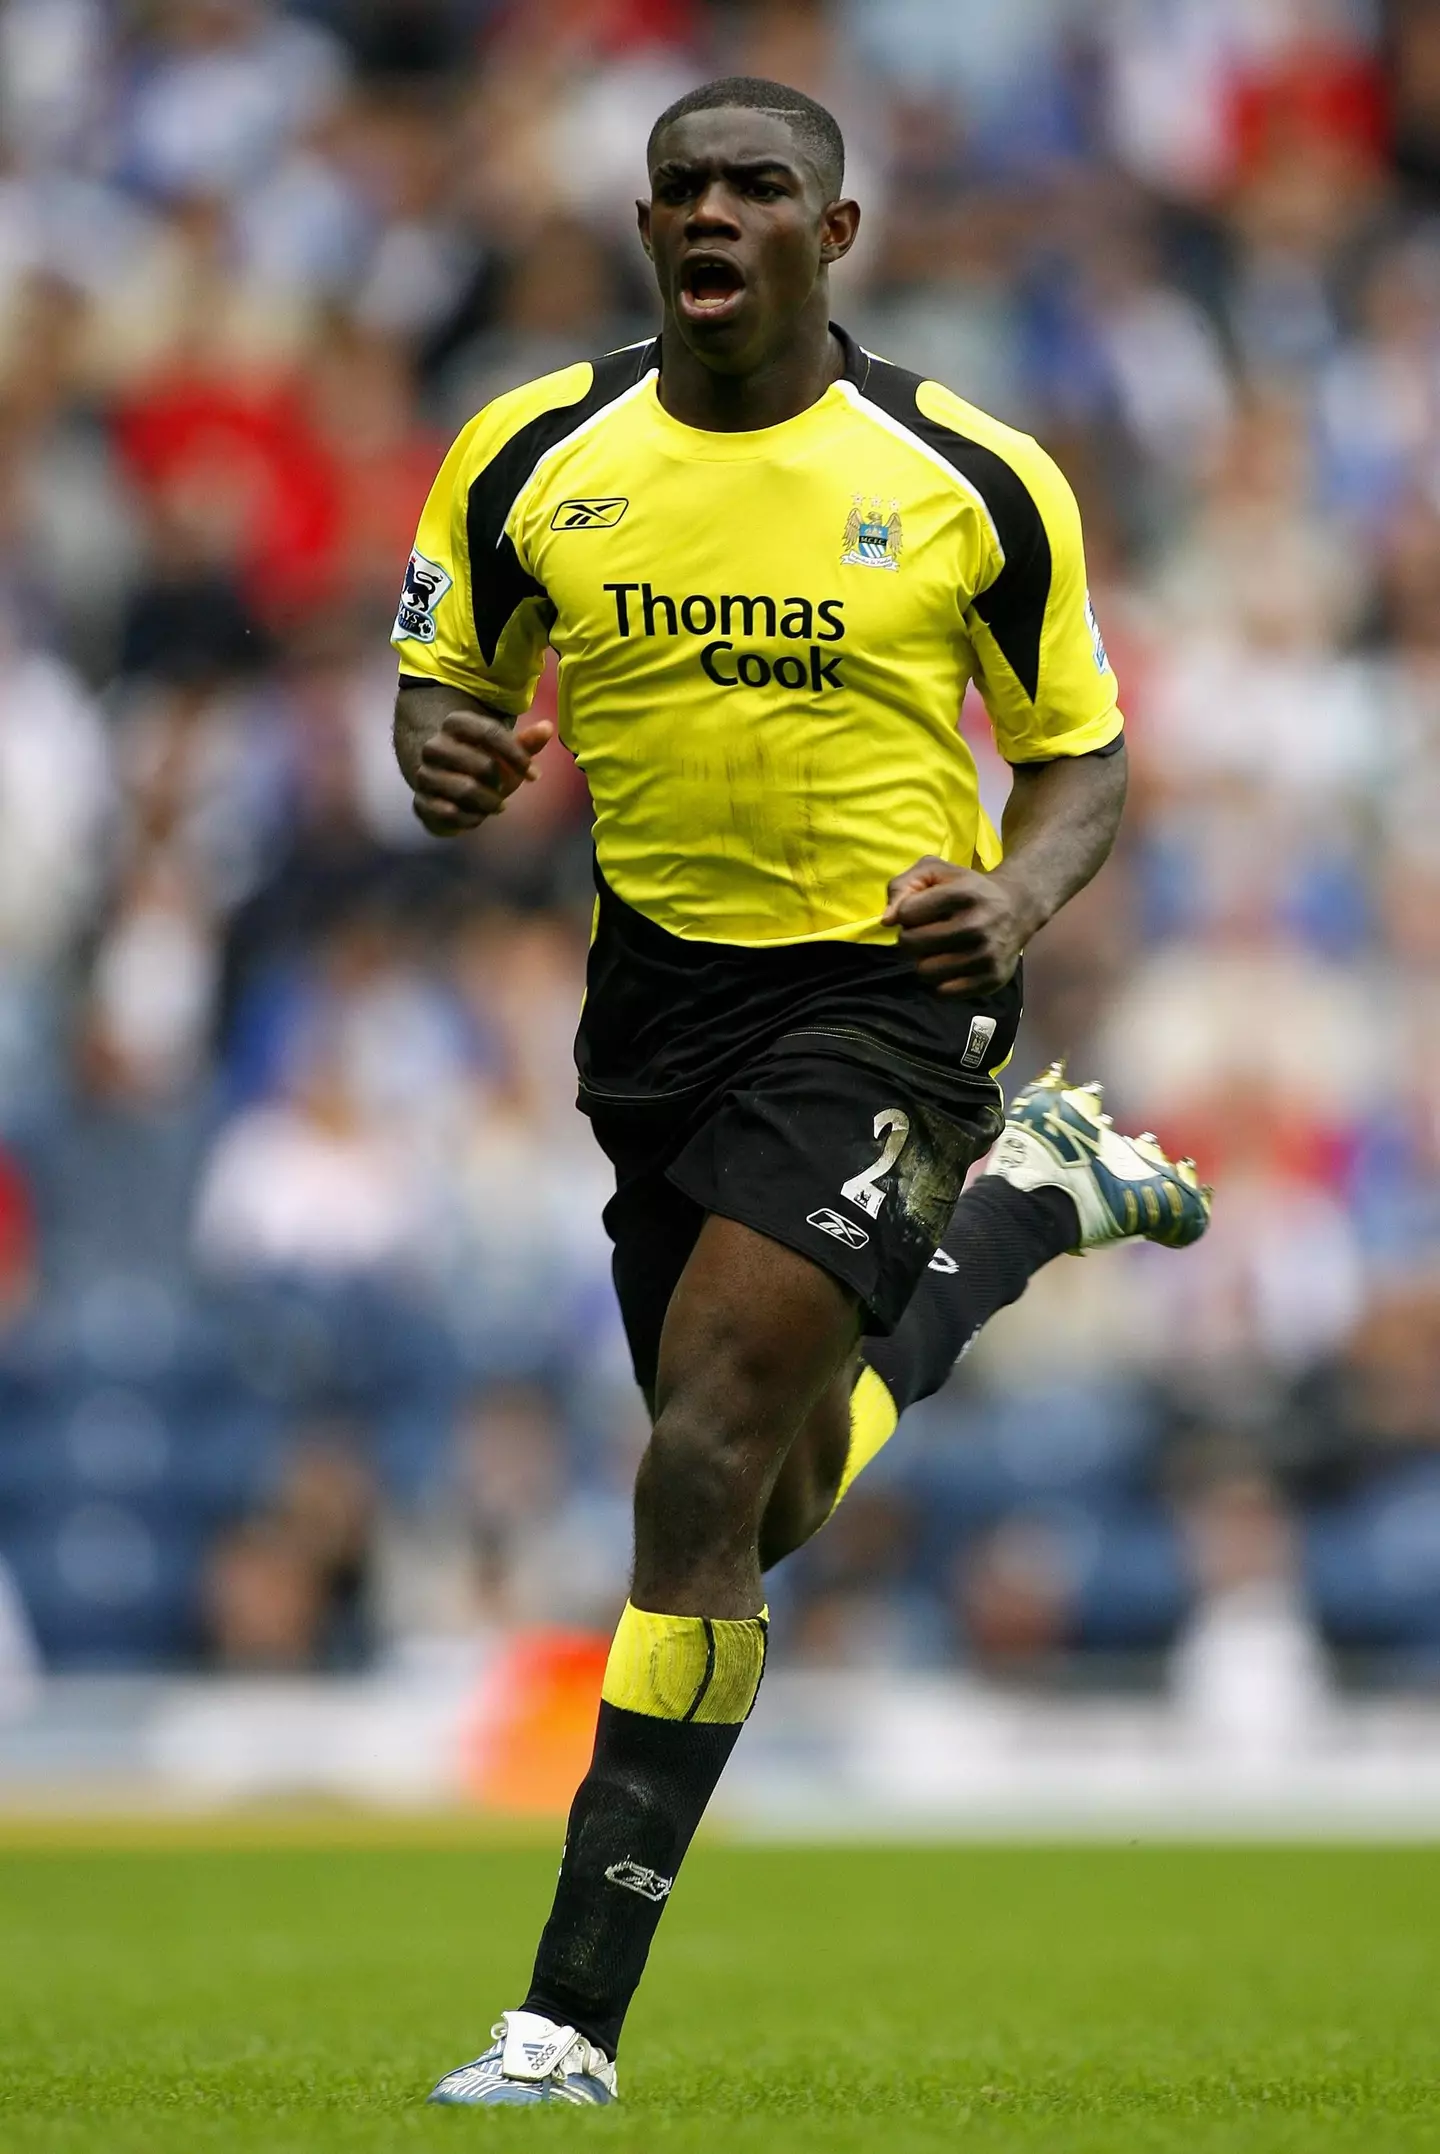 Richards made his senior debut for City in 2005 (Image: Alamy)